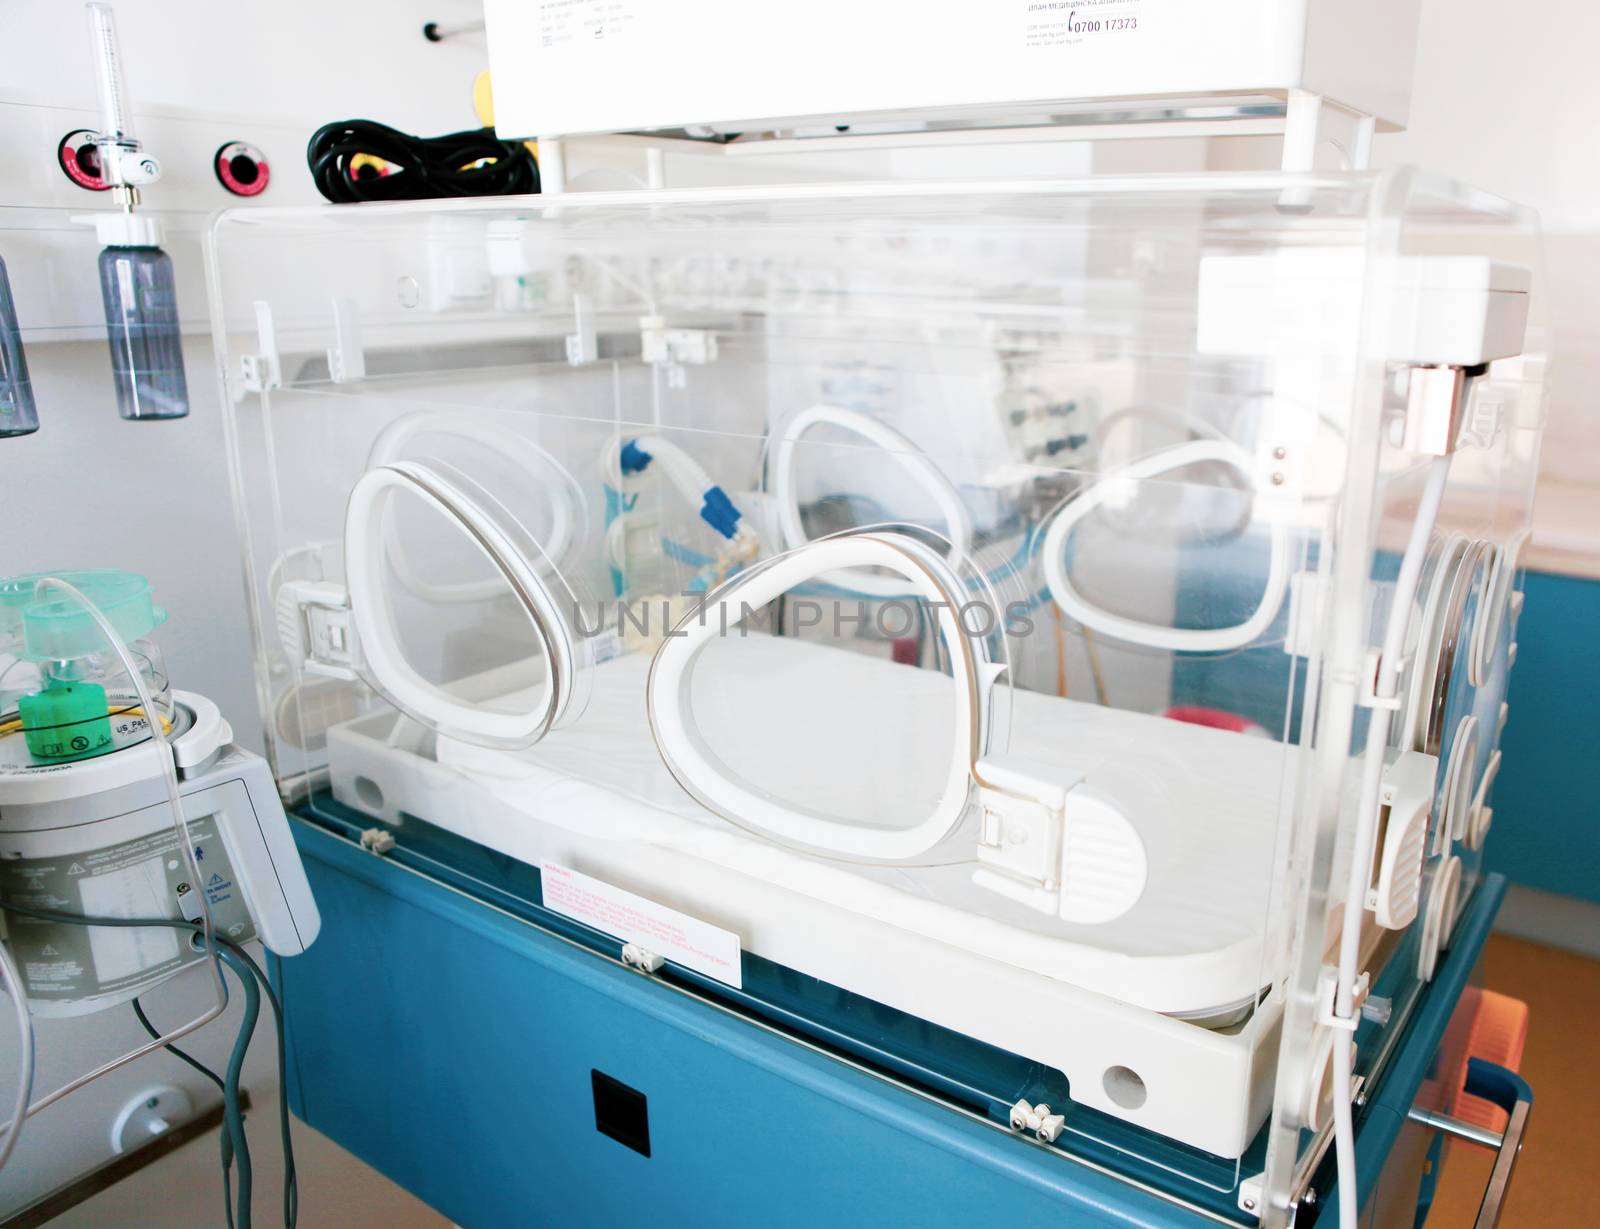 Infant Incubator Equipment - Neonatal Intensive Care Unit by nenovbrothers